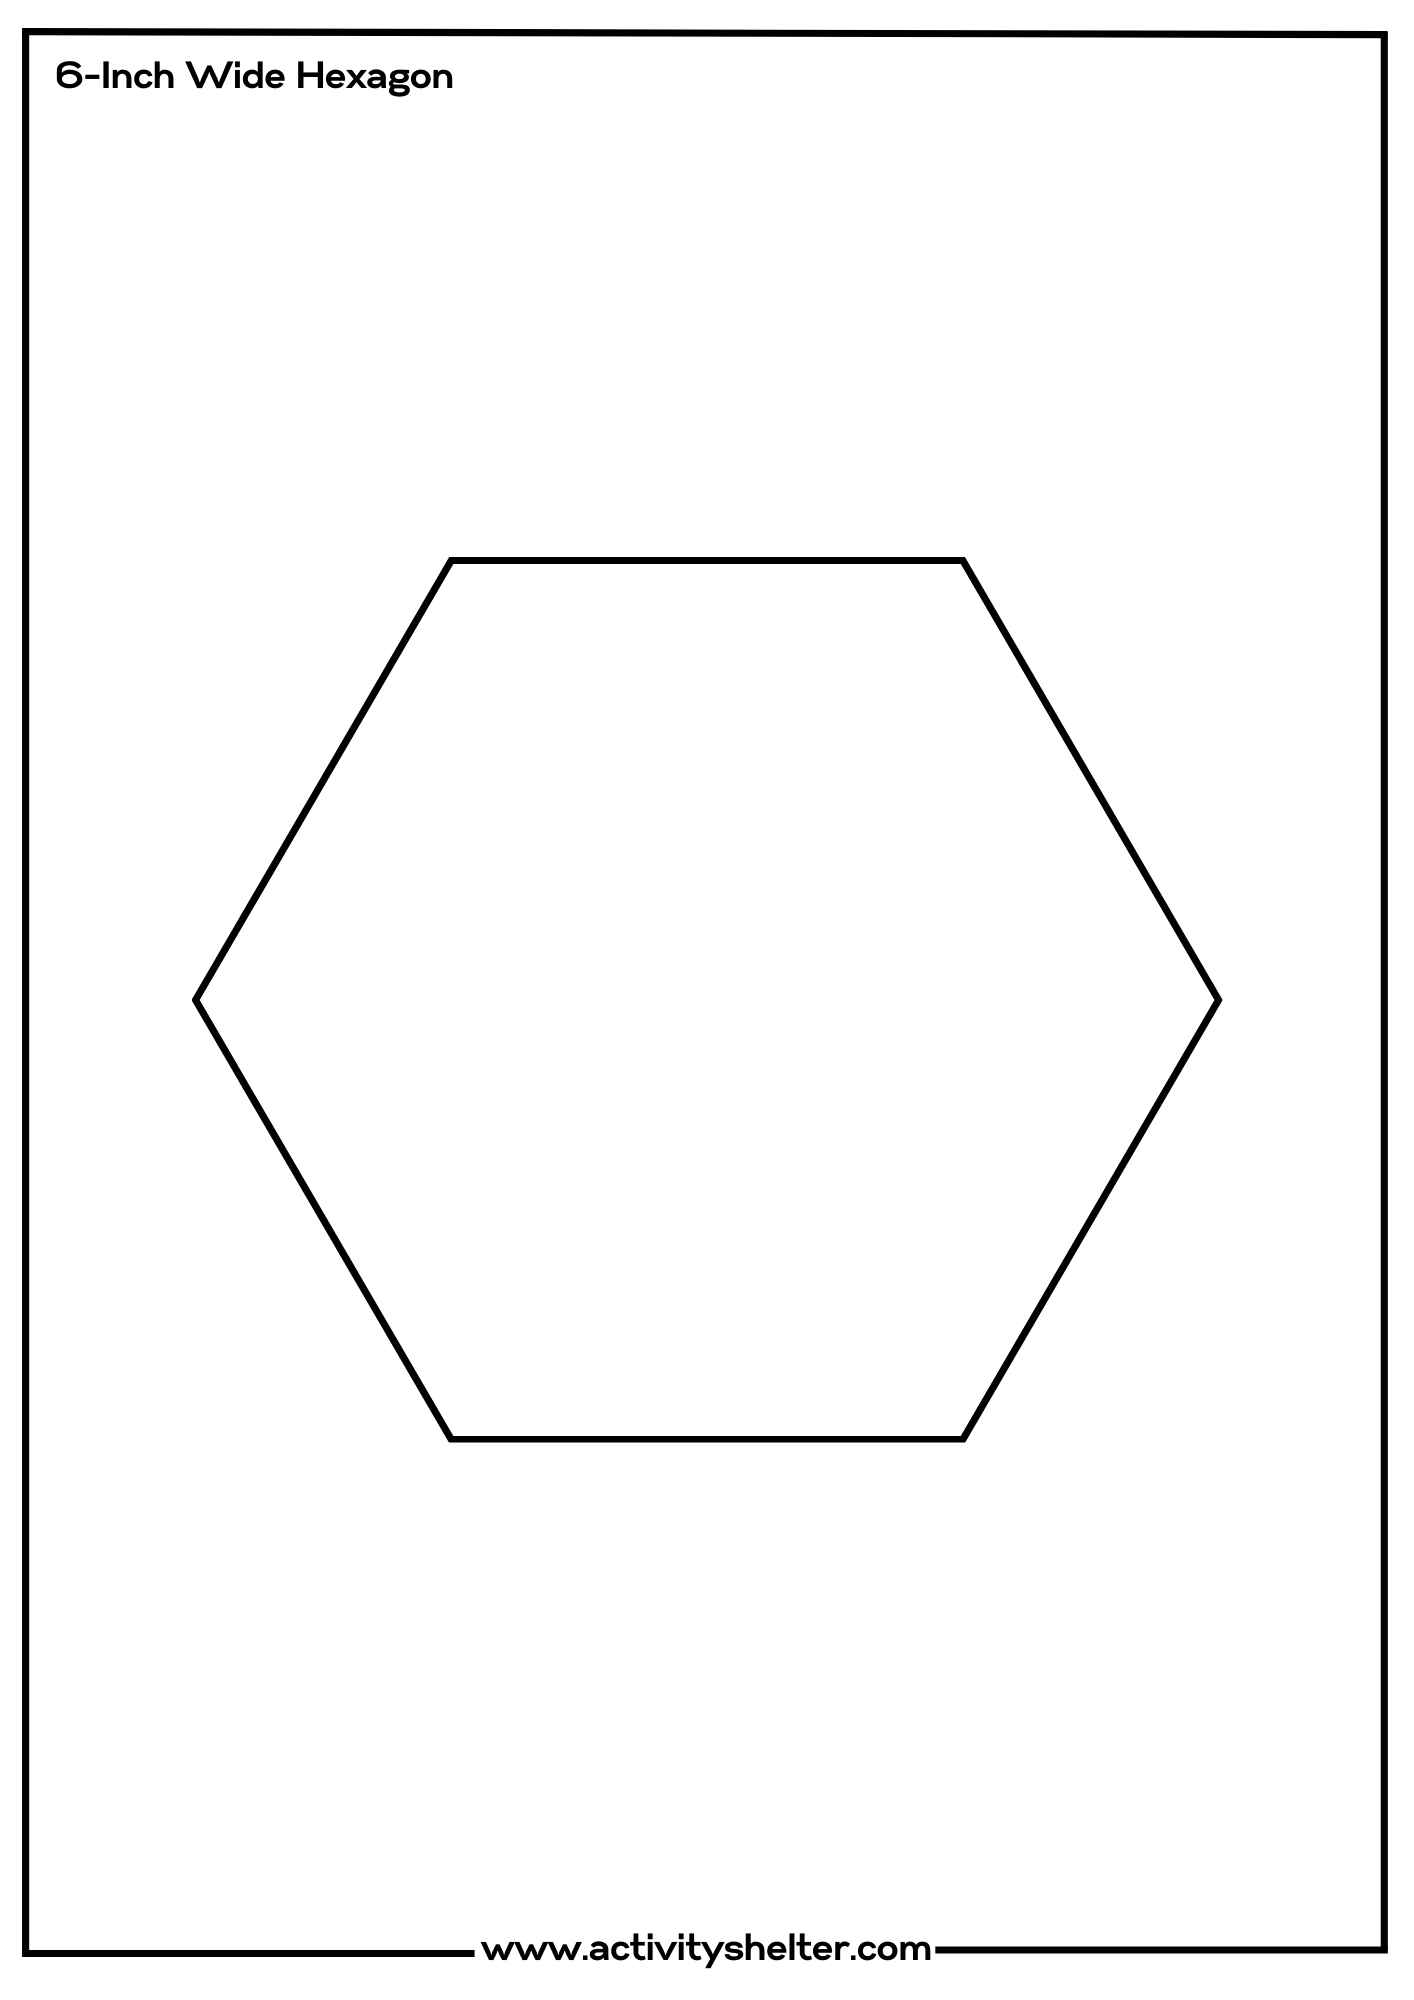 Printable Hexagon Template 6-Inch Wide